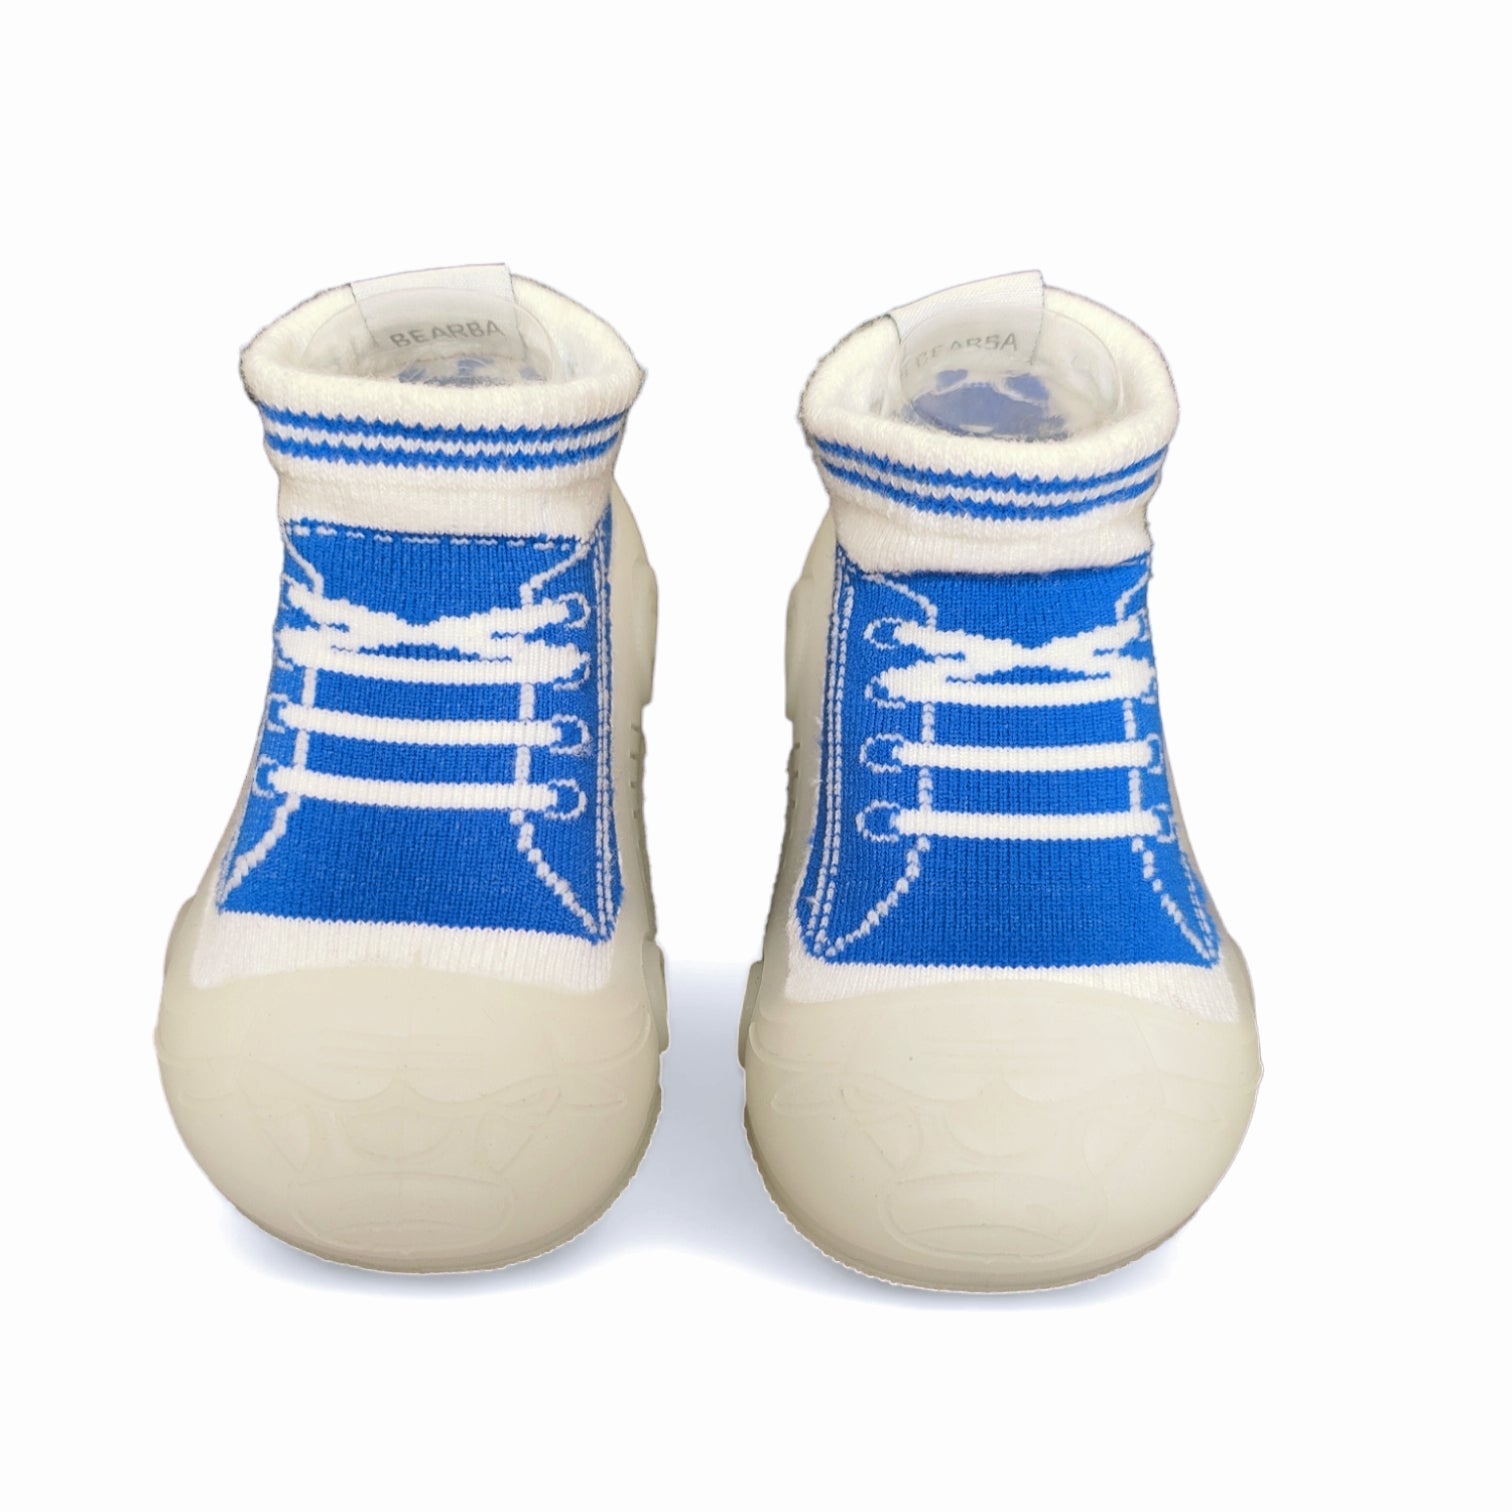 Blue Fast Back by Bearba-Sock Shoes for First Time Walkers- Sizes XS,S,M-Non slip soles- Machine washable- Boys - Bearba